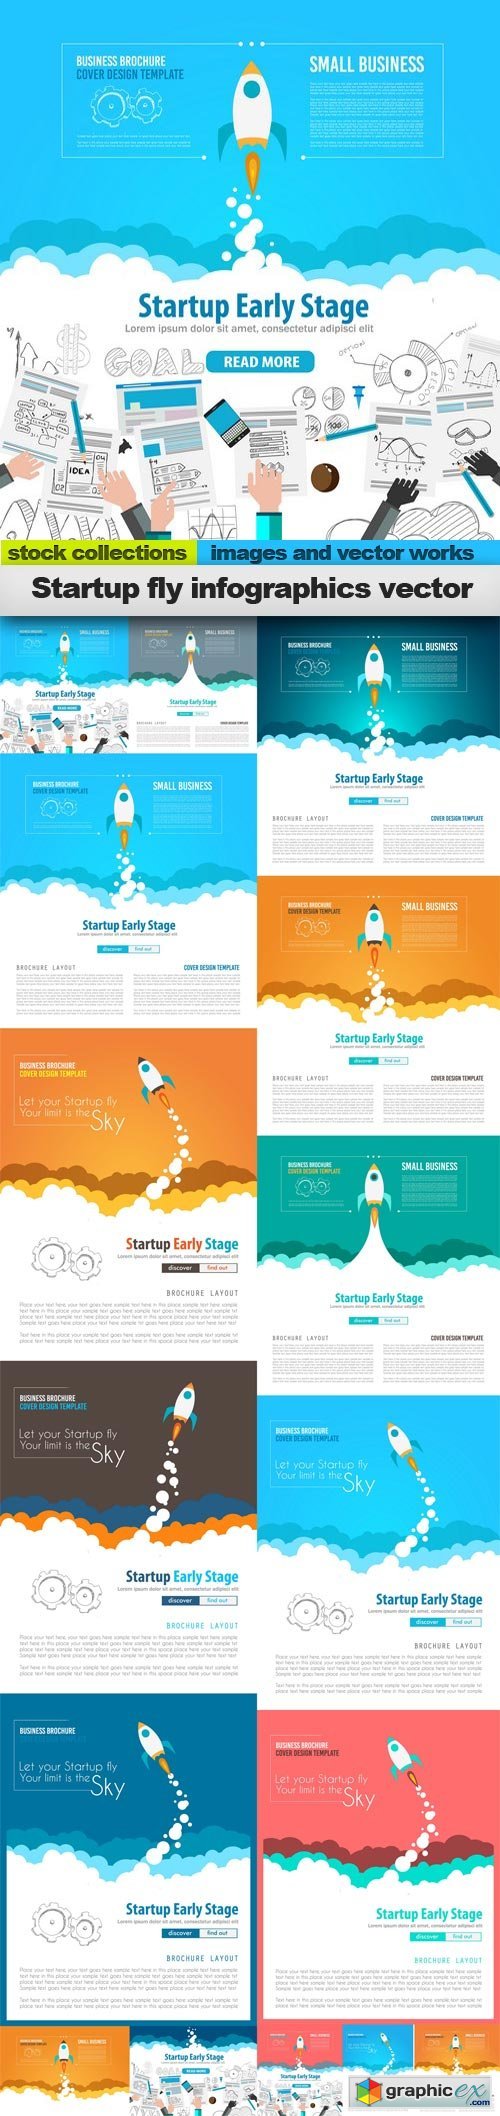 Startup fly infographics vector, 15 x EPS